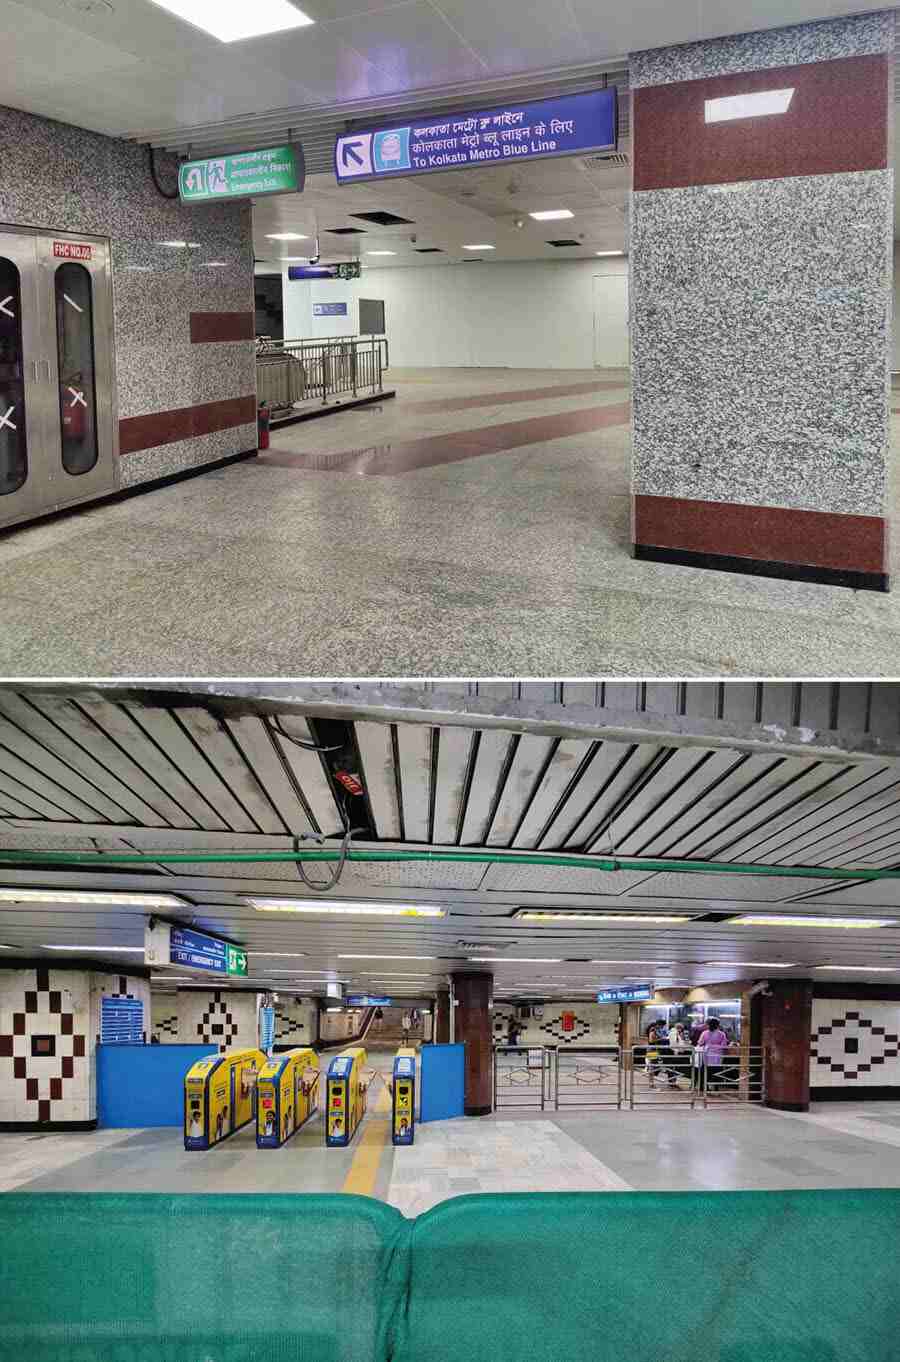 Glimpses of the newly constructed Passenger Interchanging Point of the Green line and Blue line at Esplanade Metro station  